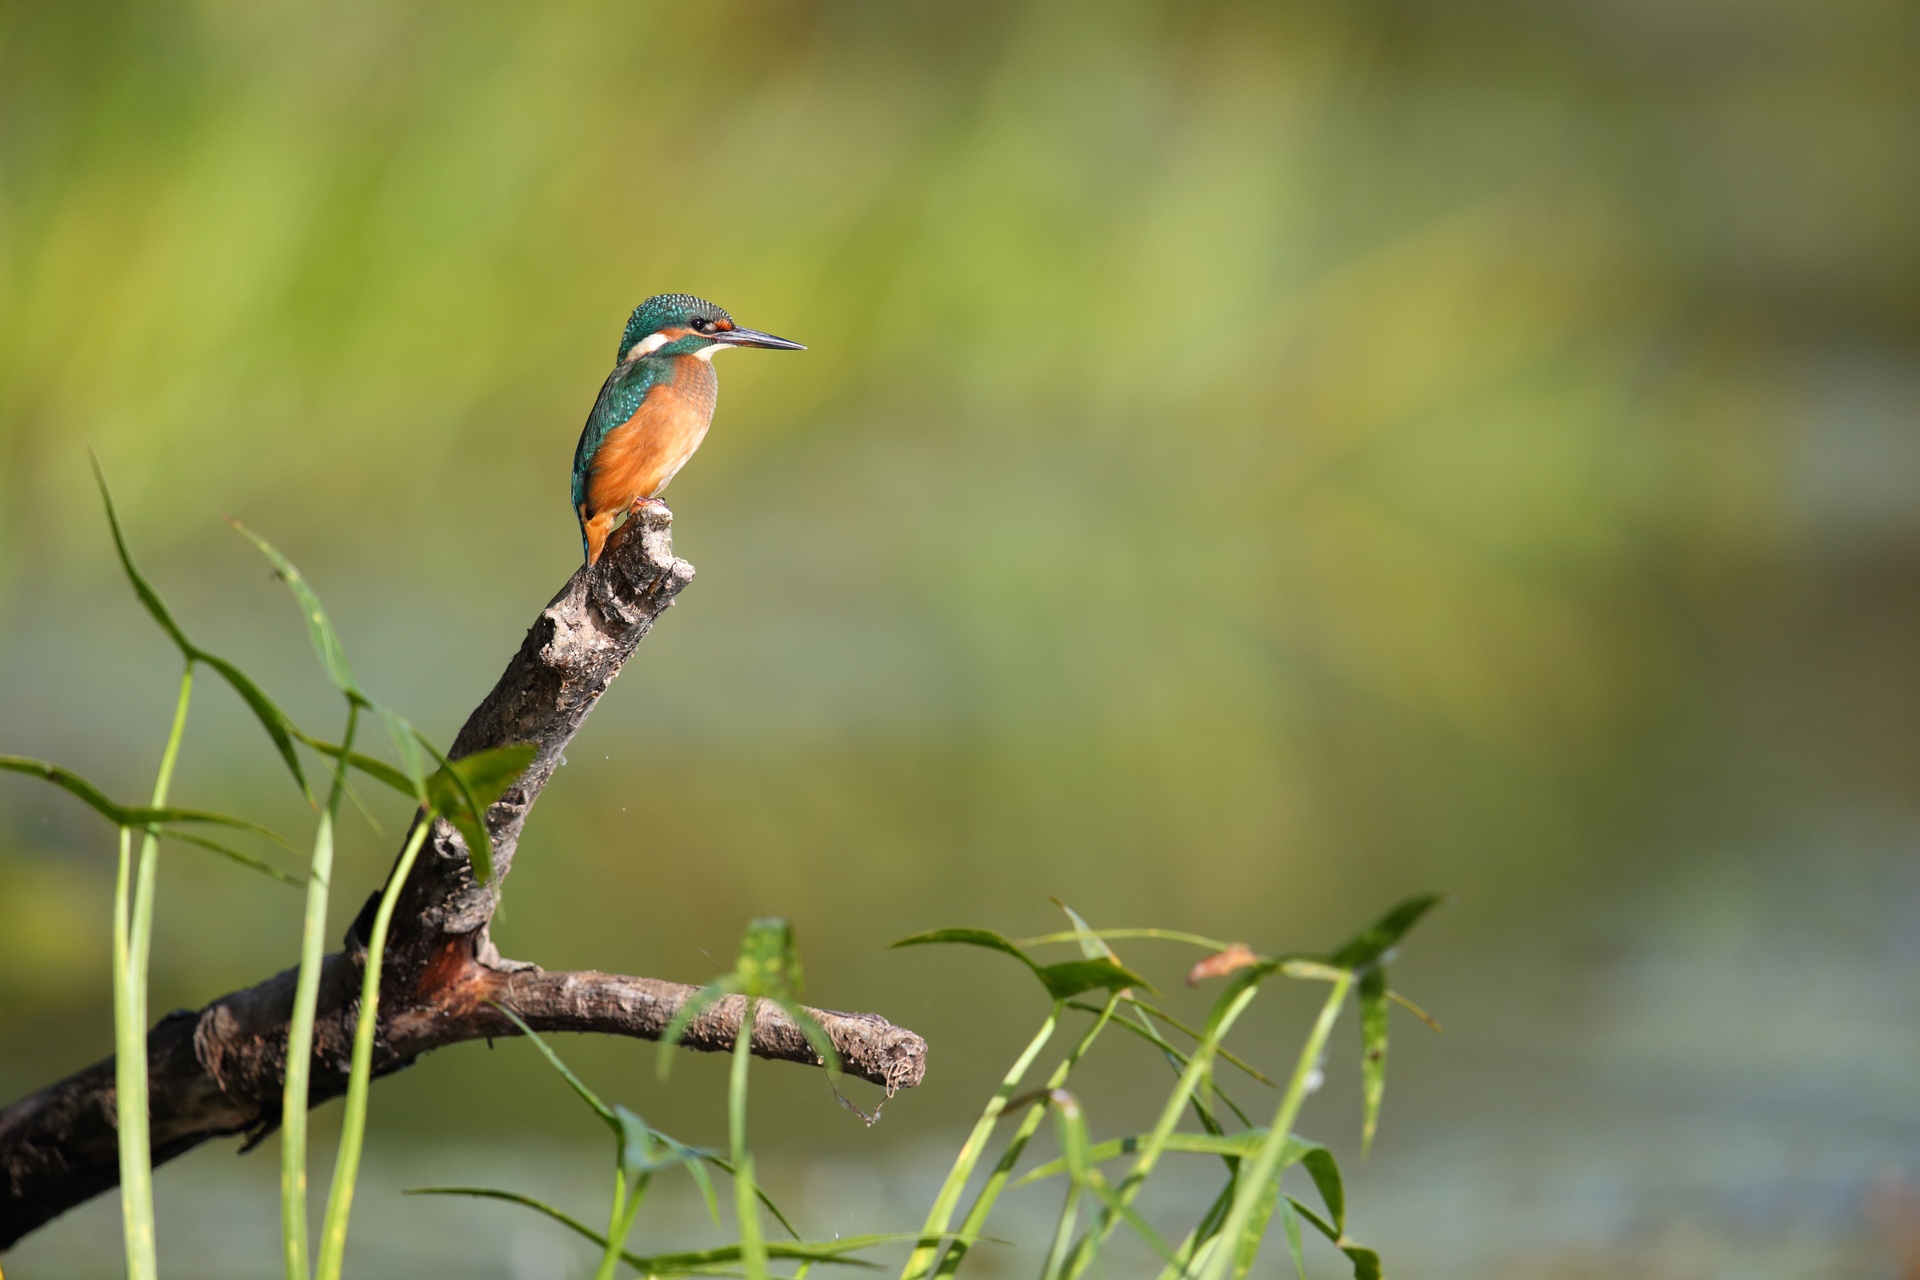 Common kingfisher perched on a branch in Estonia